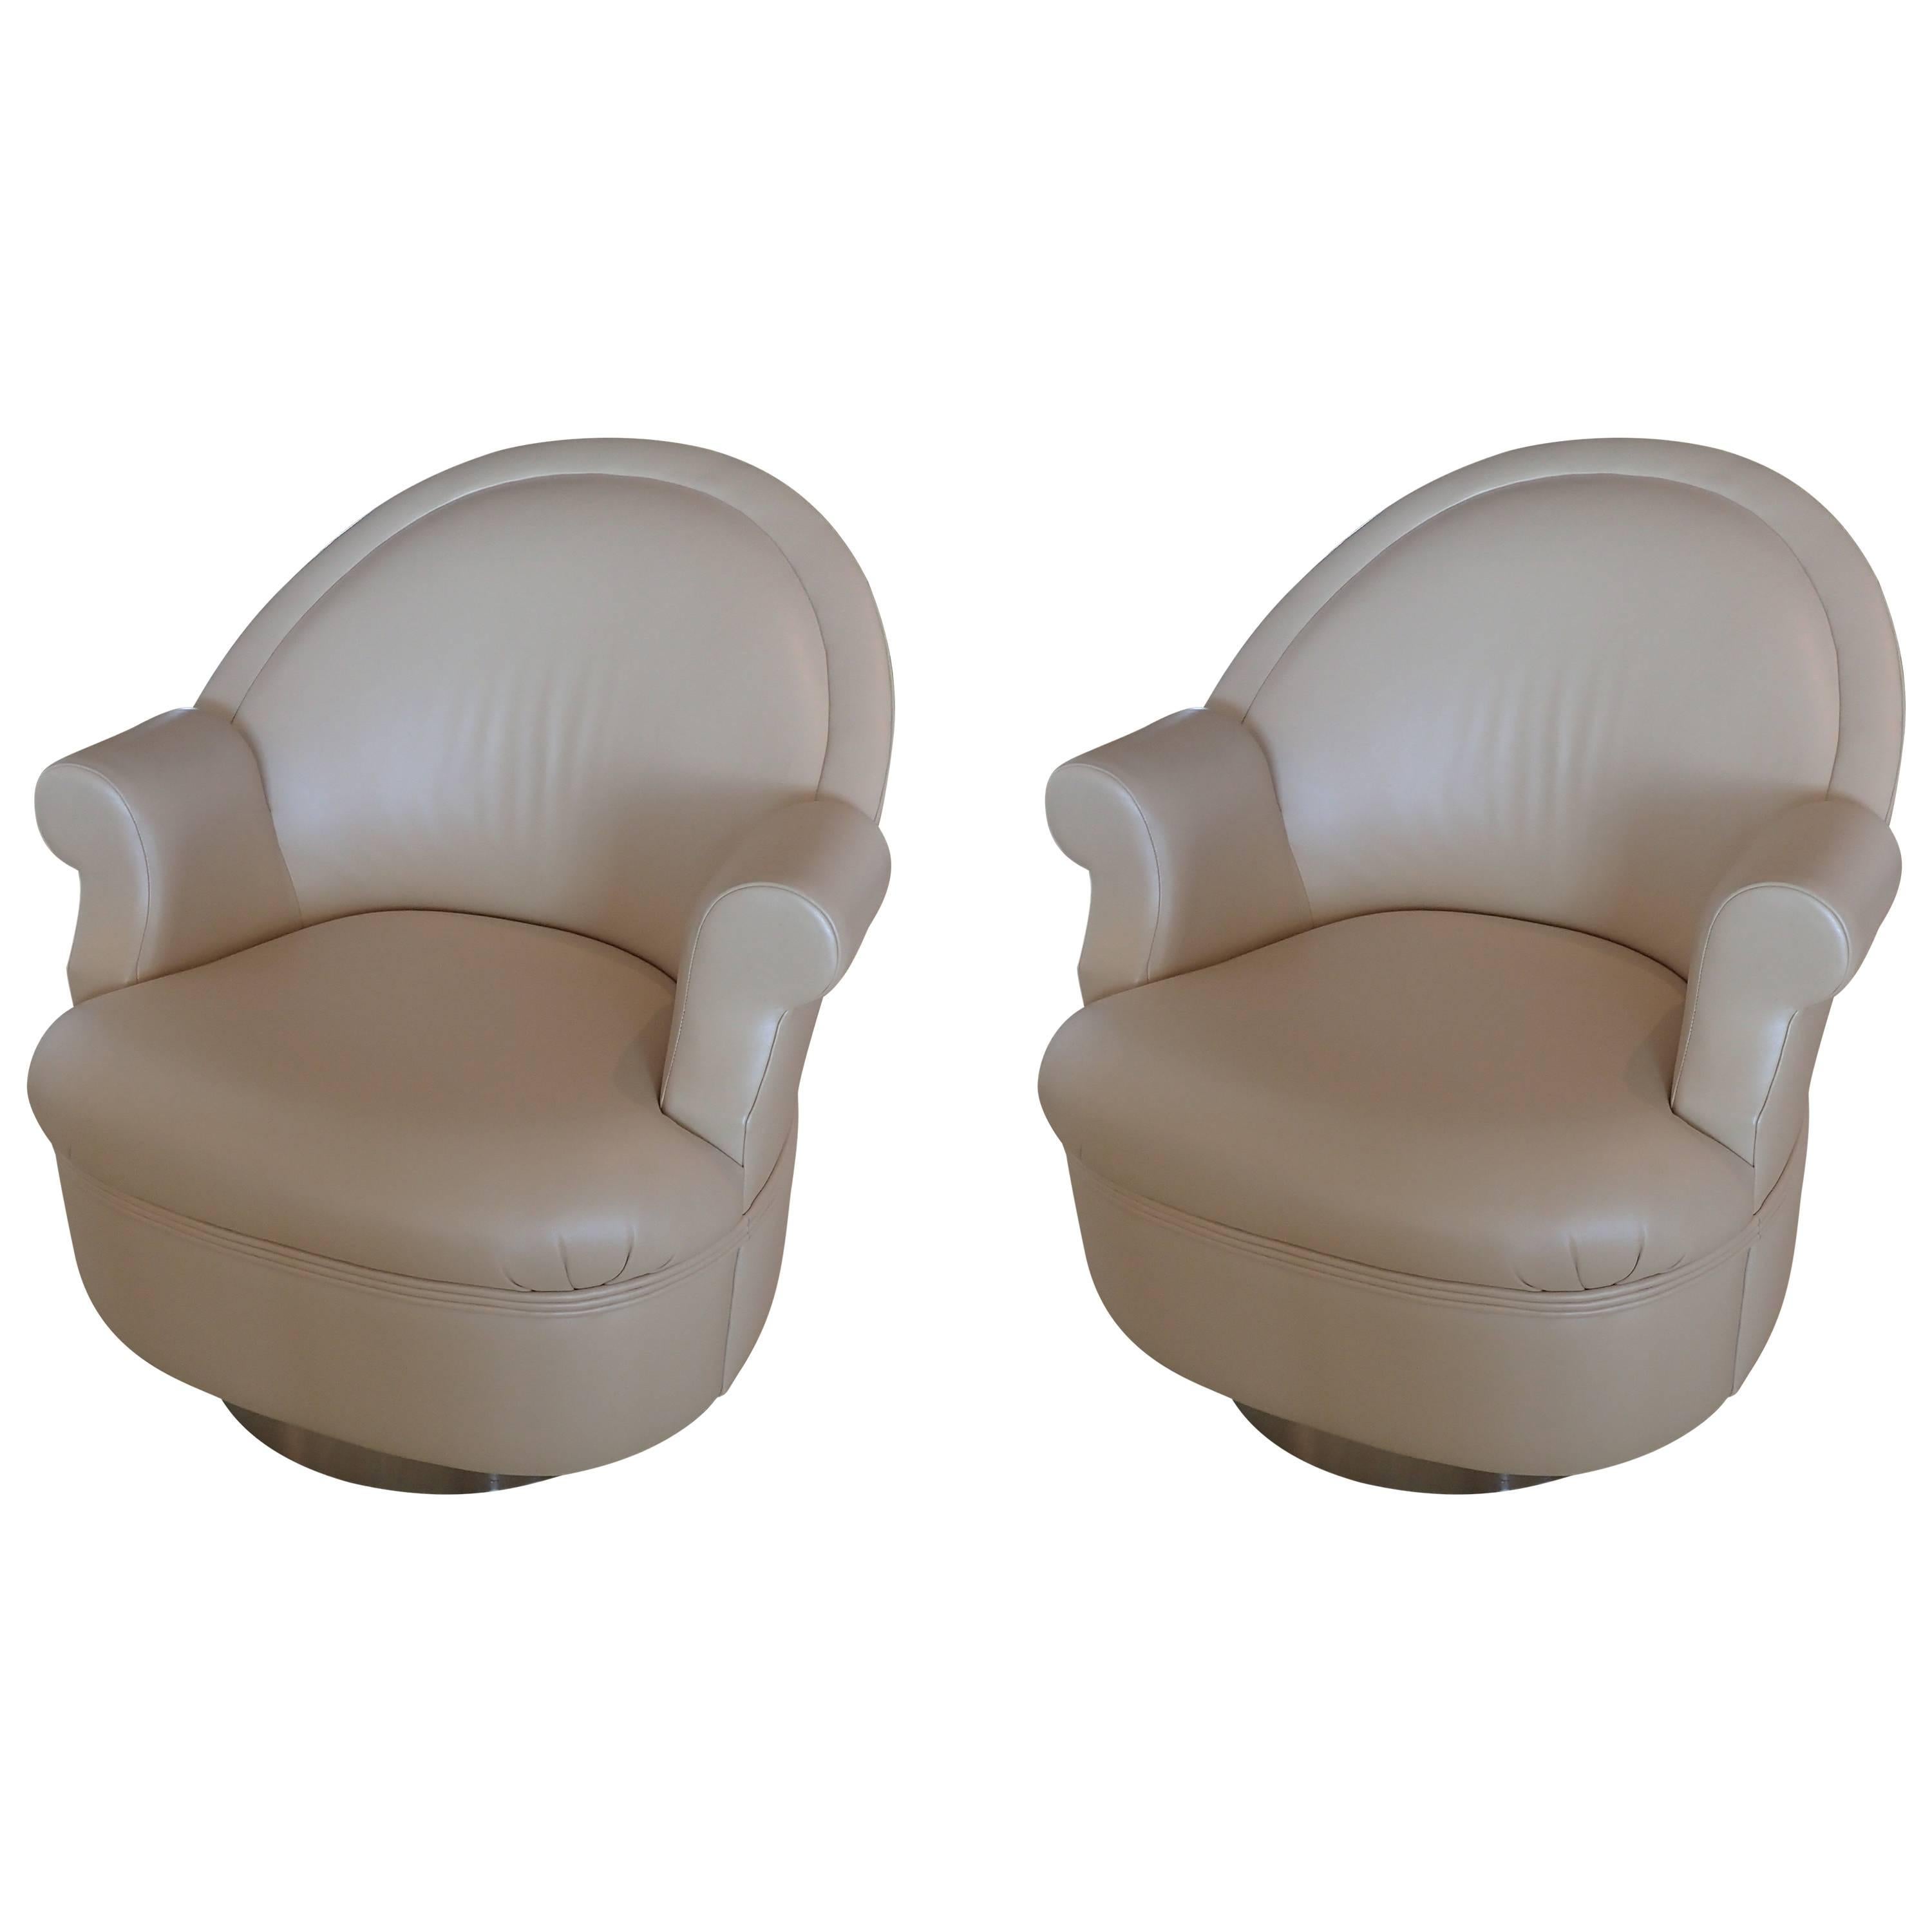 Pair of Swivel Chairs For Sale